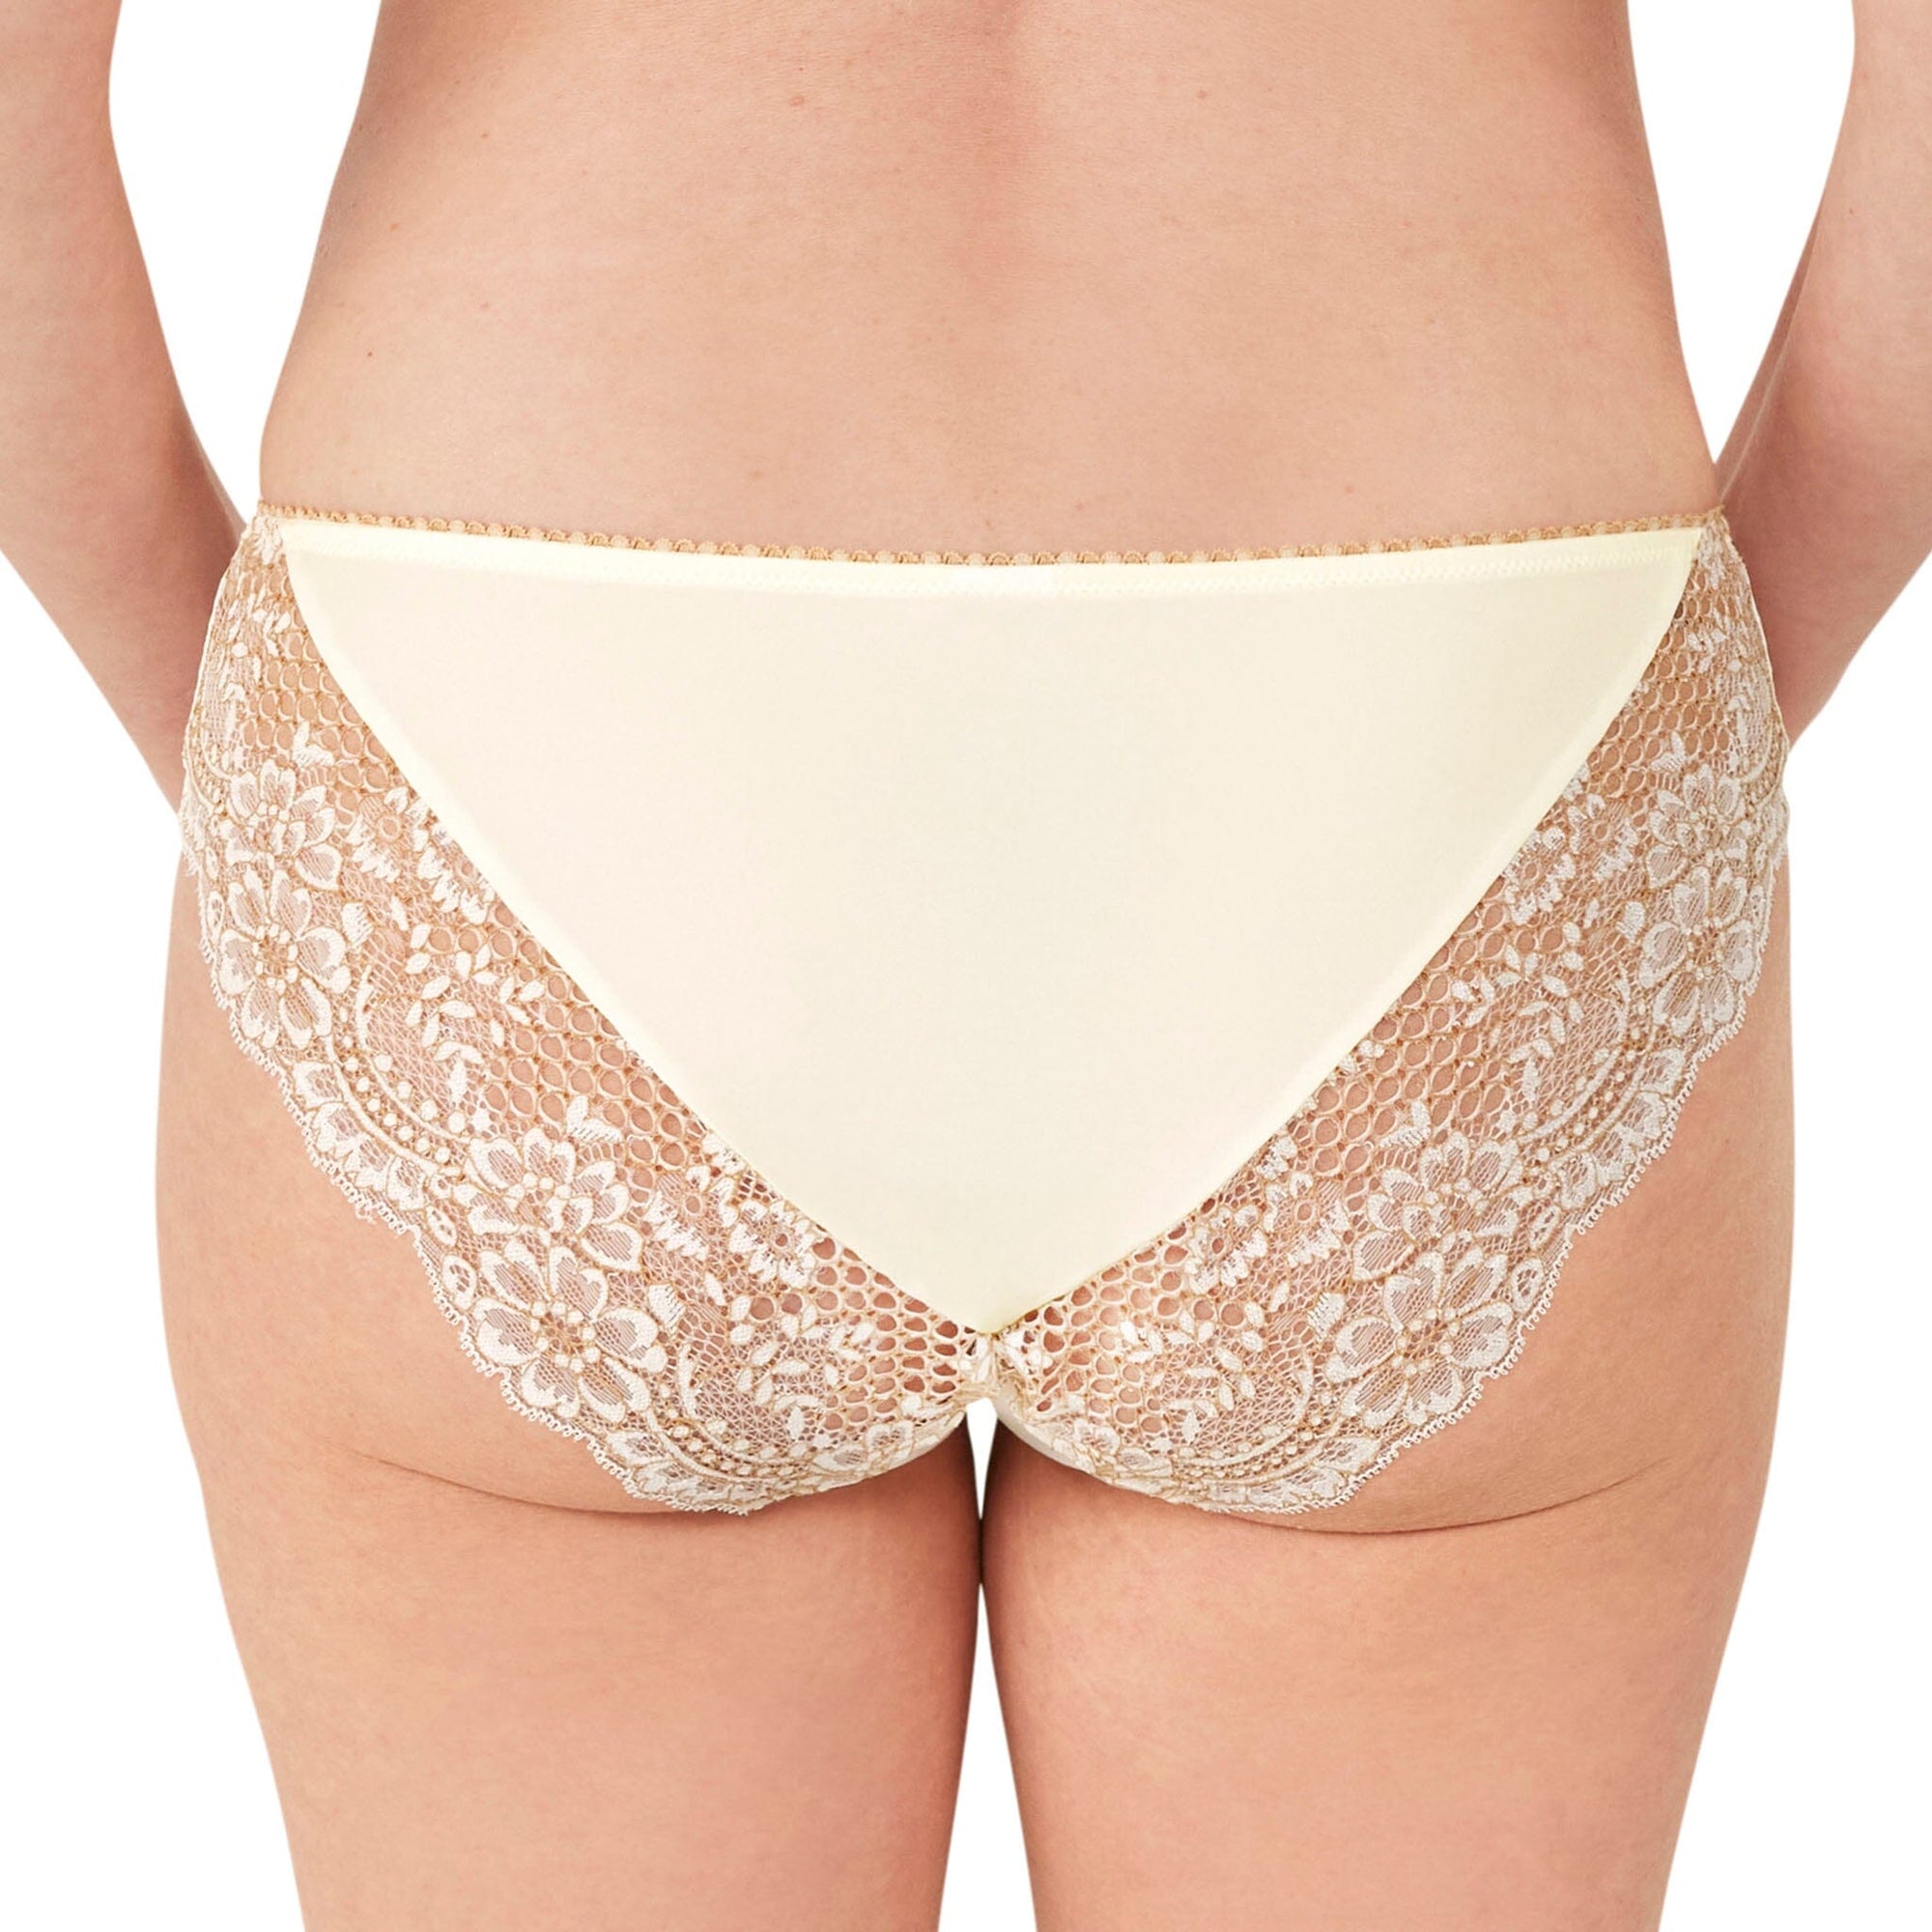 Amoena® Alina Panty and Alina Padded Wire-Free Bra (#9735) Shown in Off-White Beige – Back View